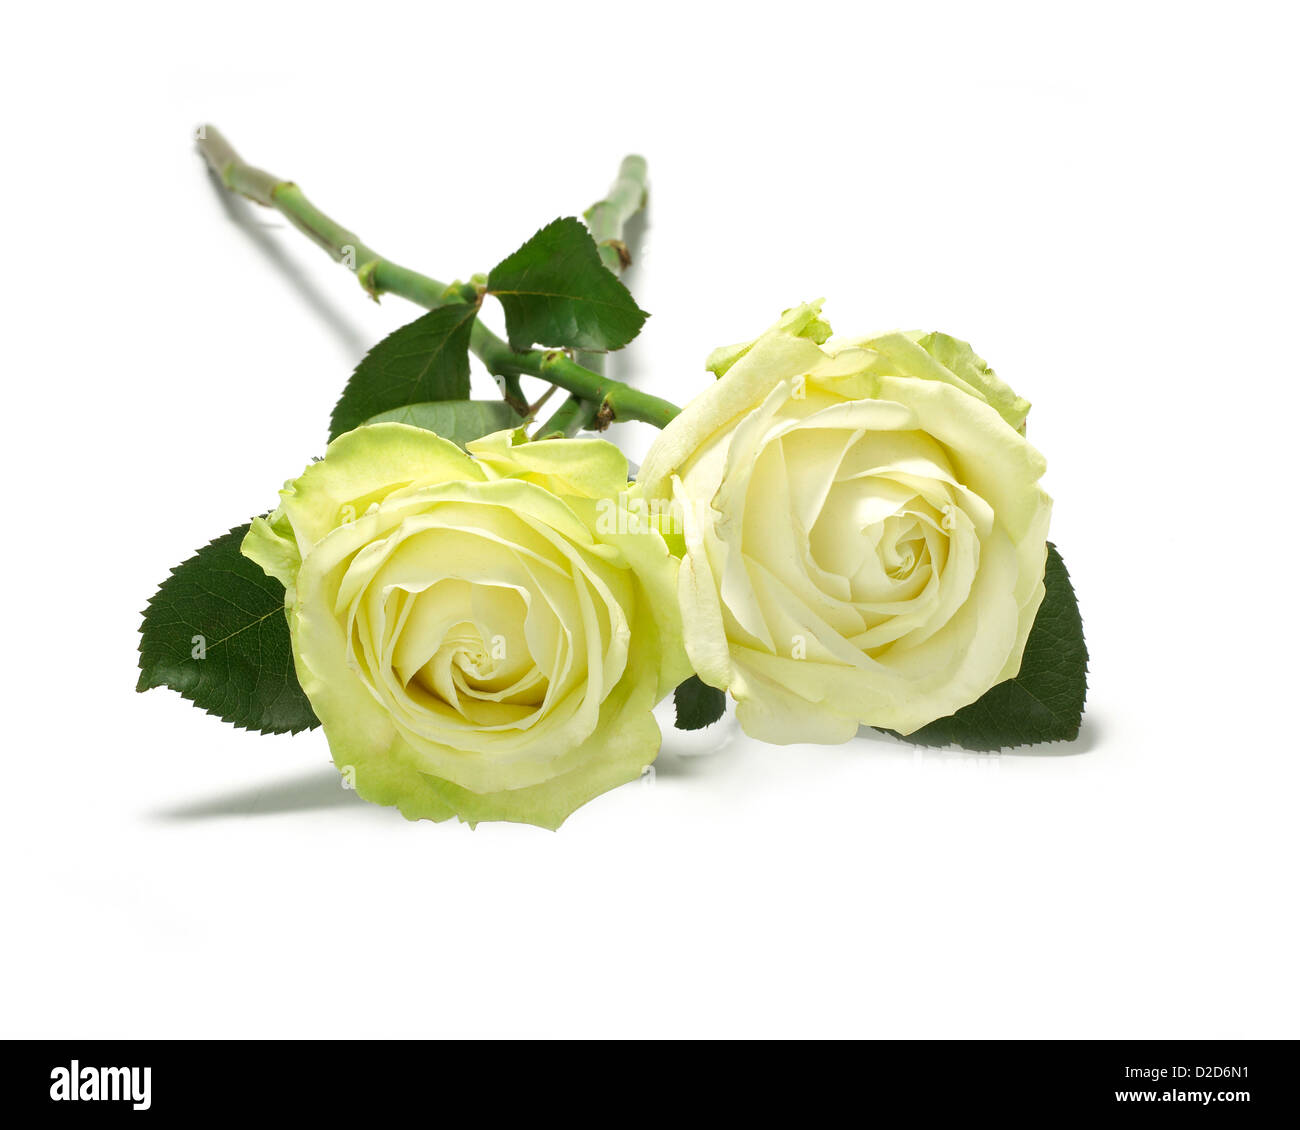 Two yellow roses cut out white background Stock Photo